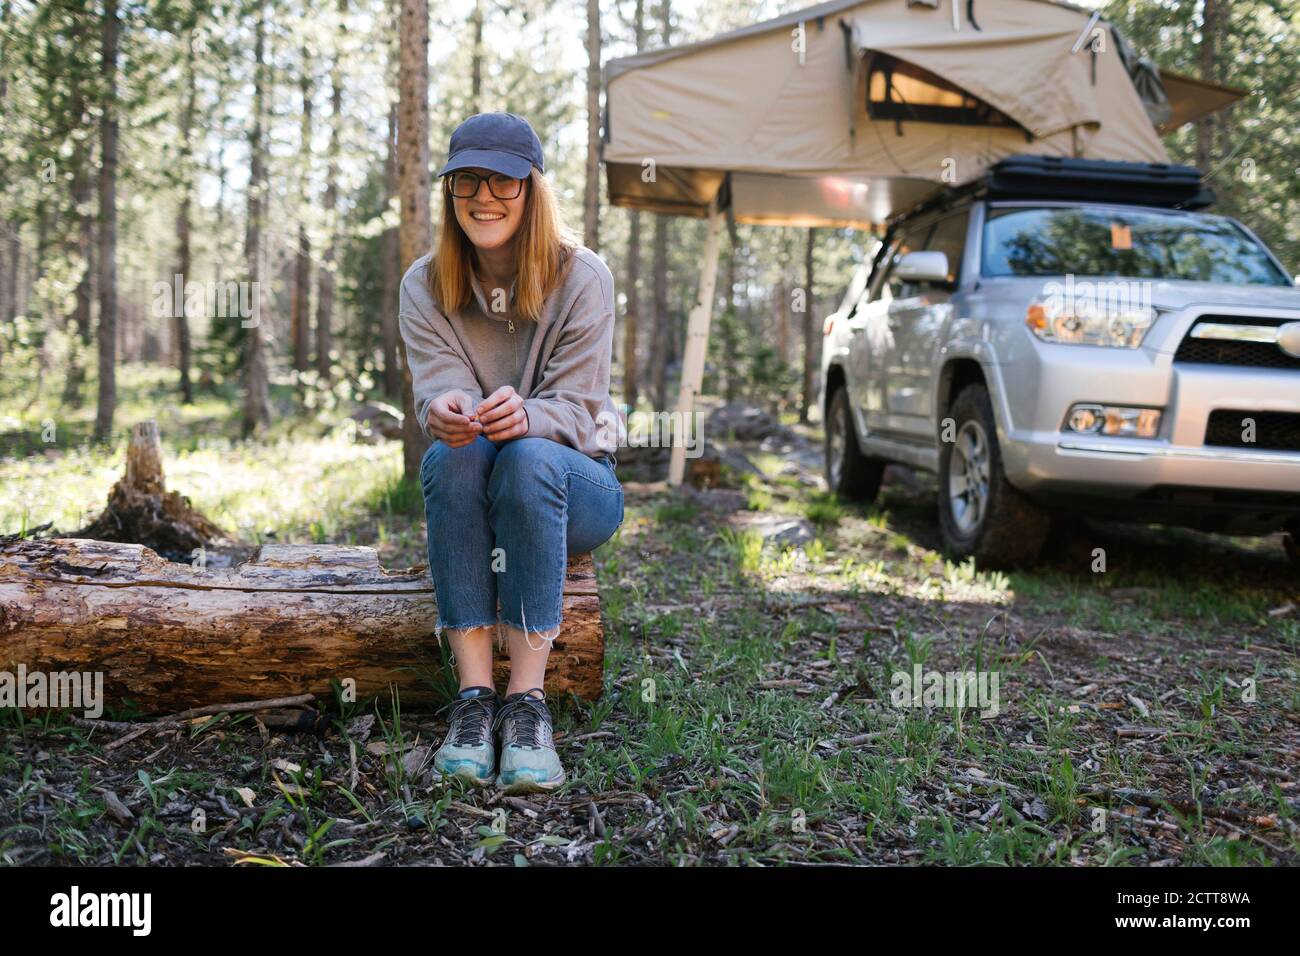 Portrait of smiling woman sitting on log on camping, car with tent in background, Wasatch Cache National Forest Stock Photo